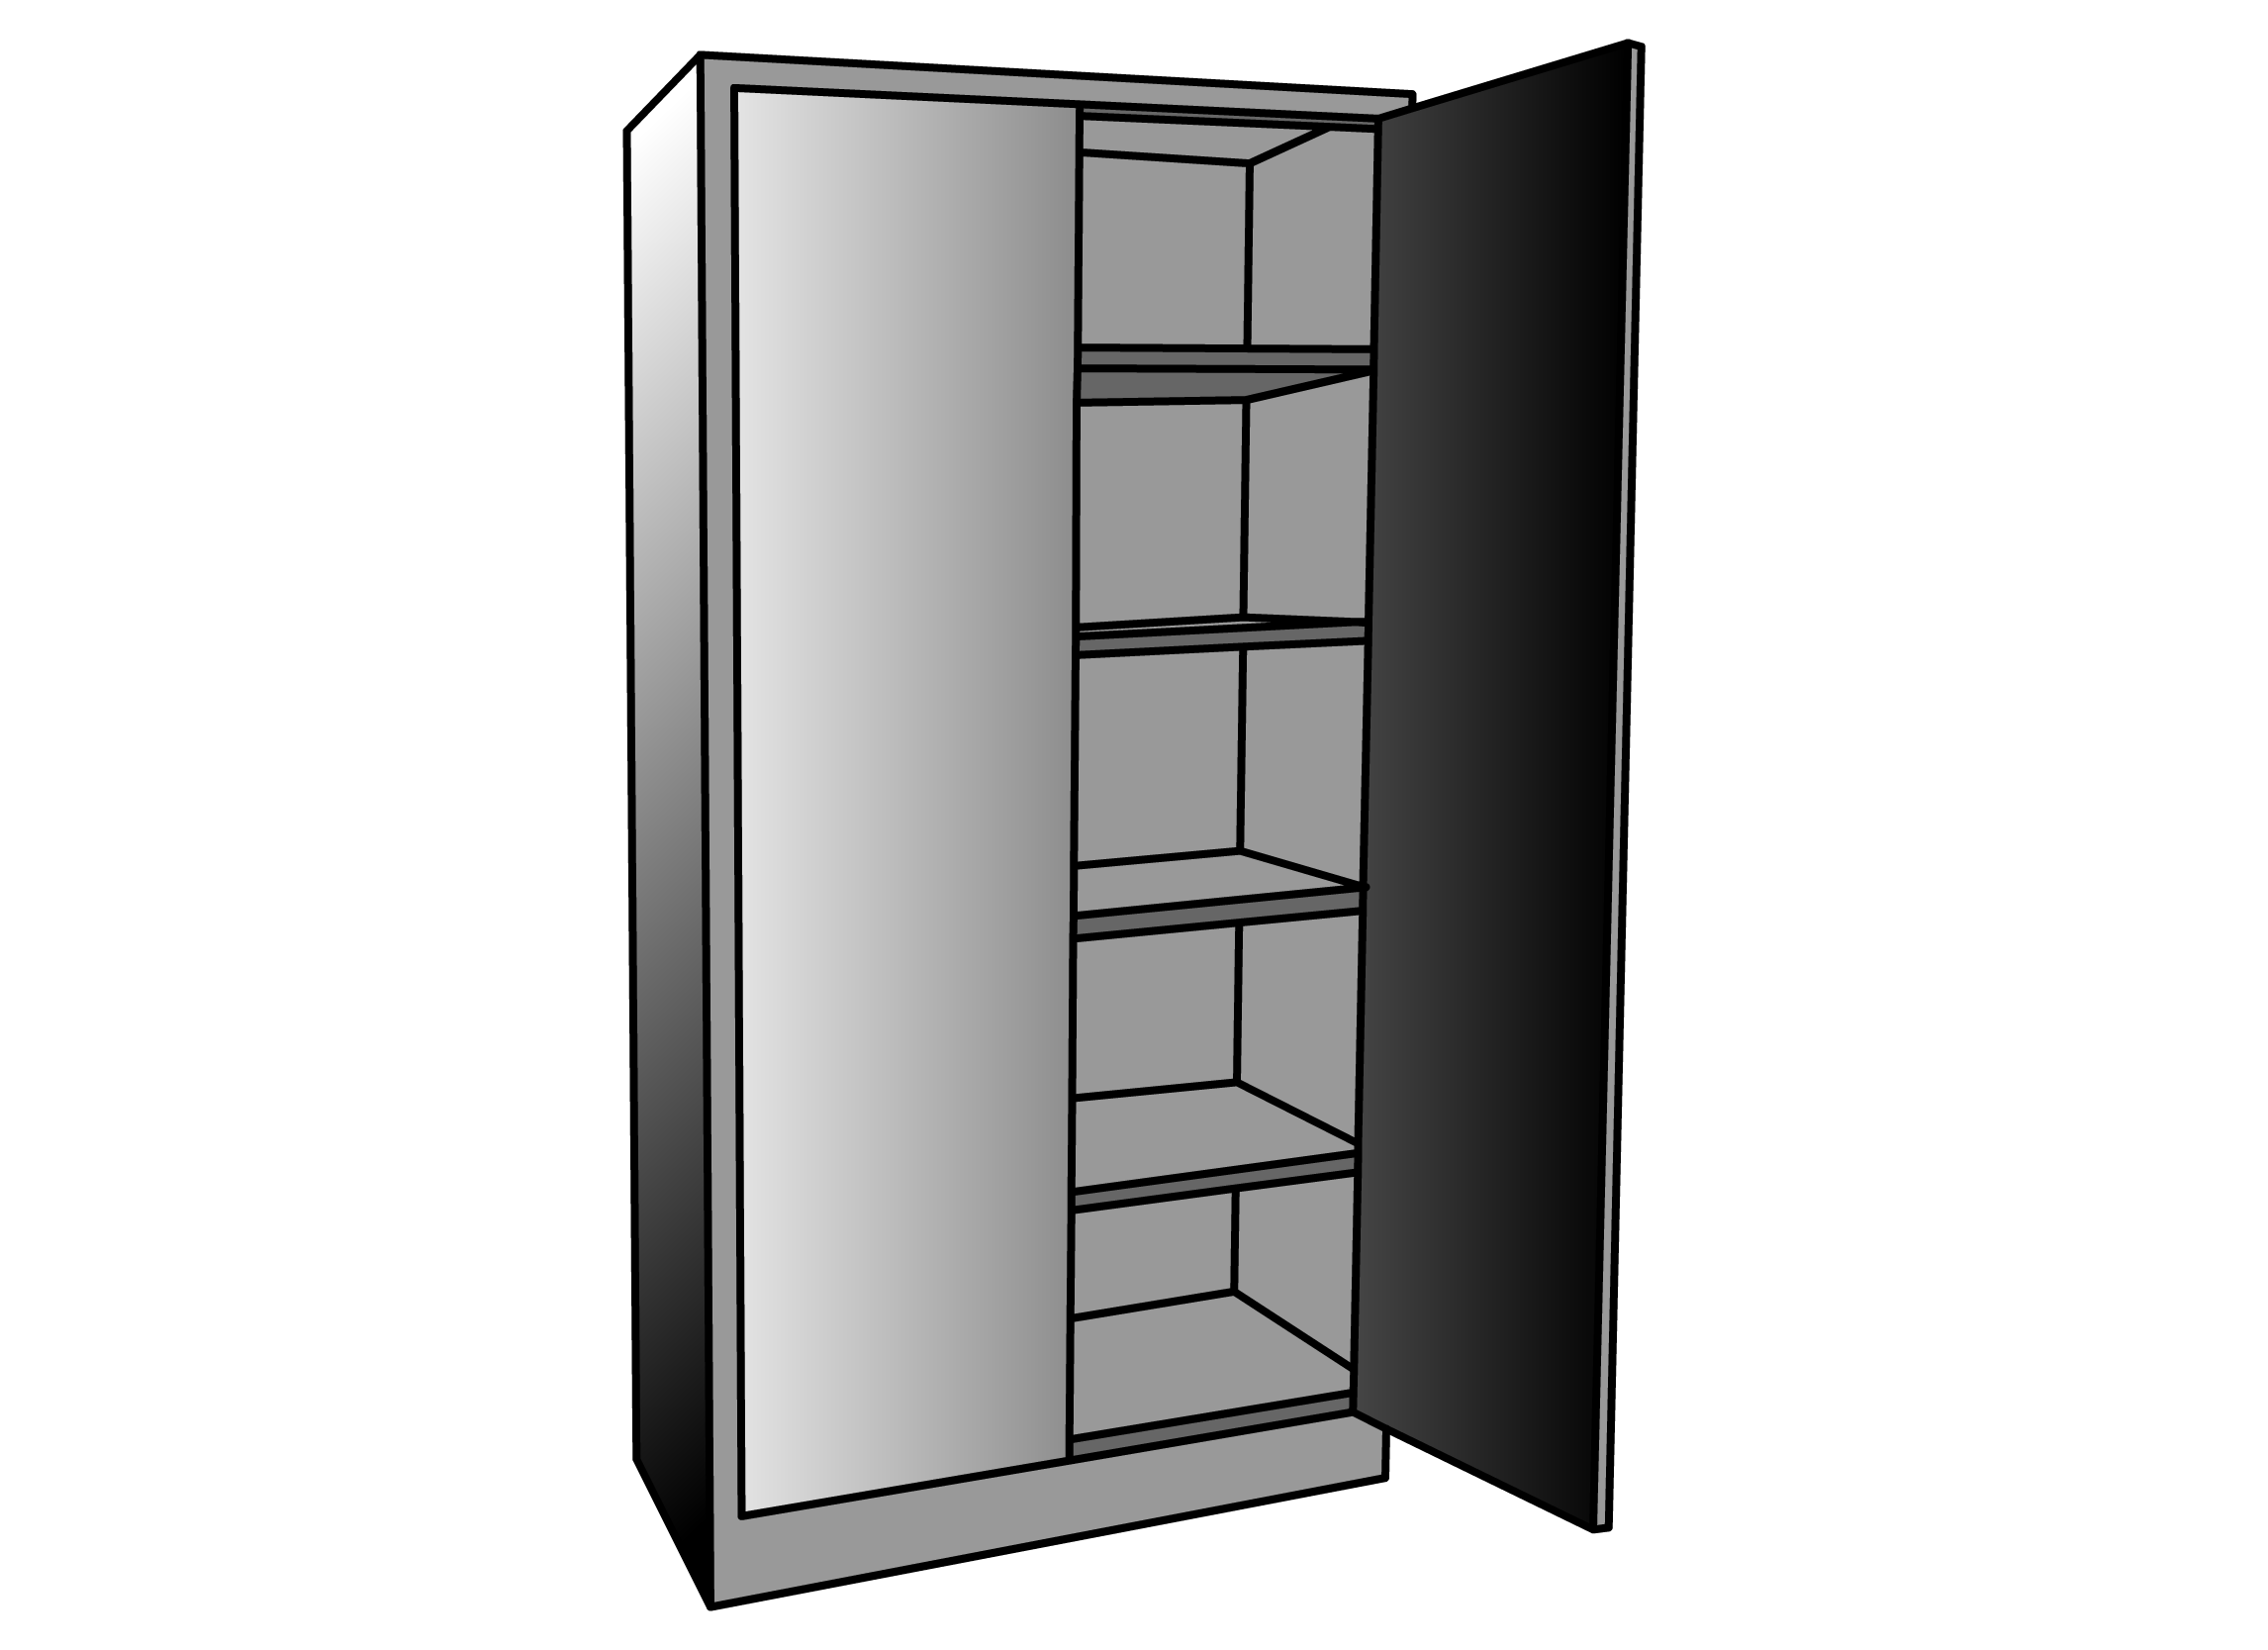 Stationery Cupboards